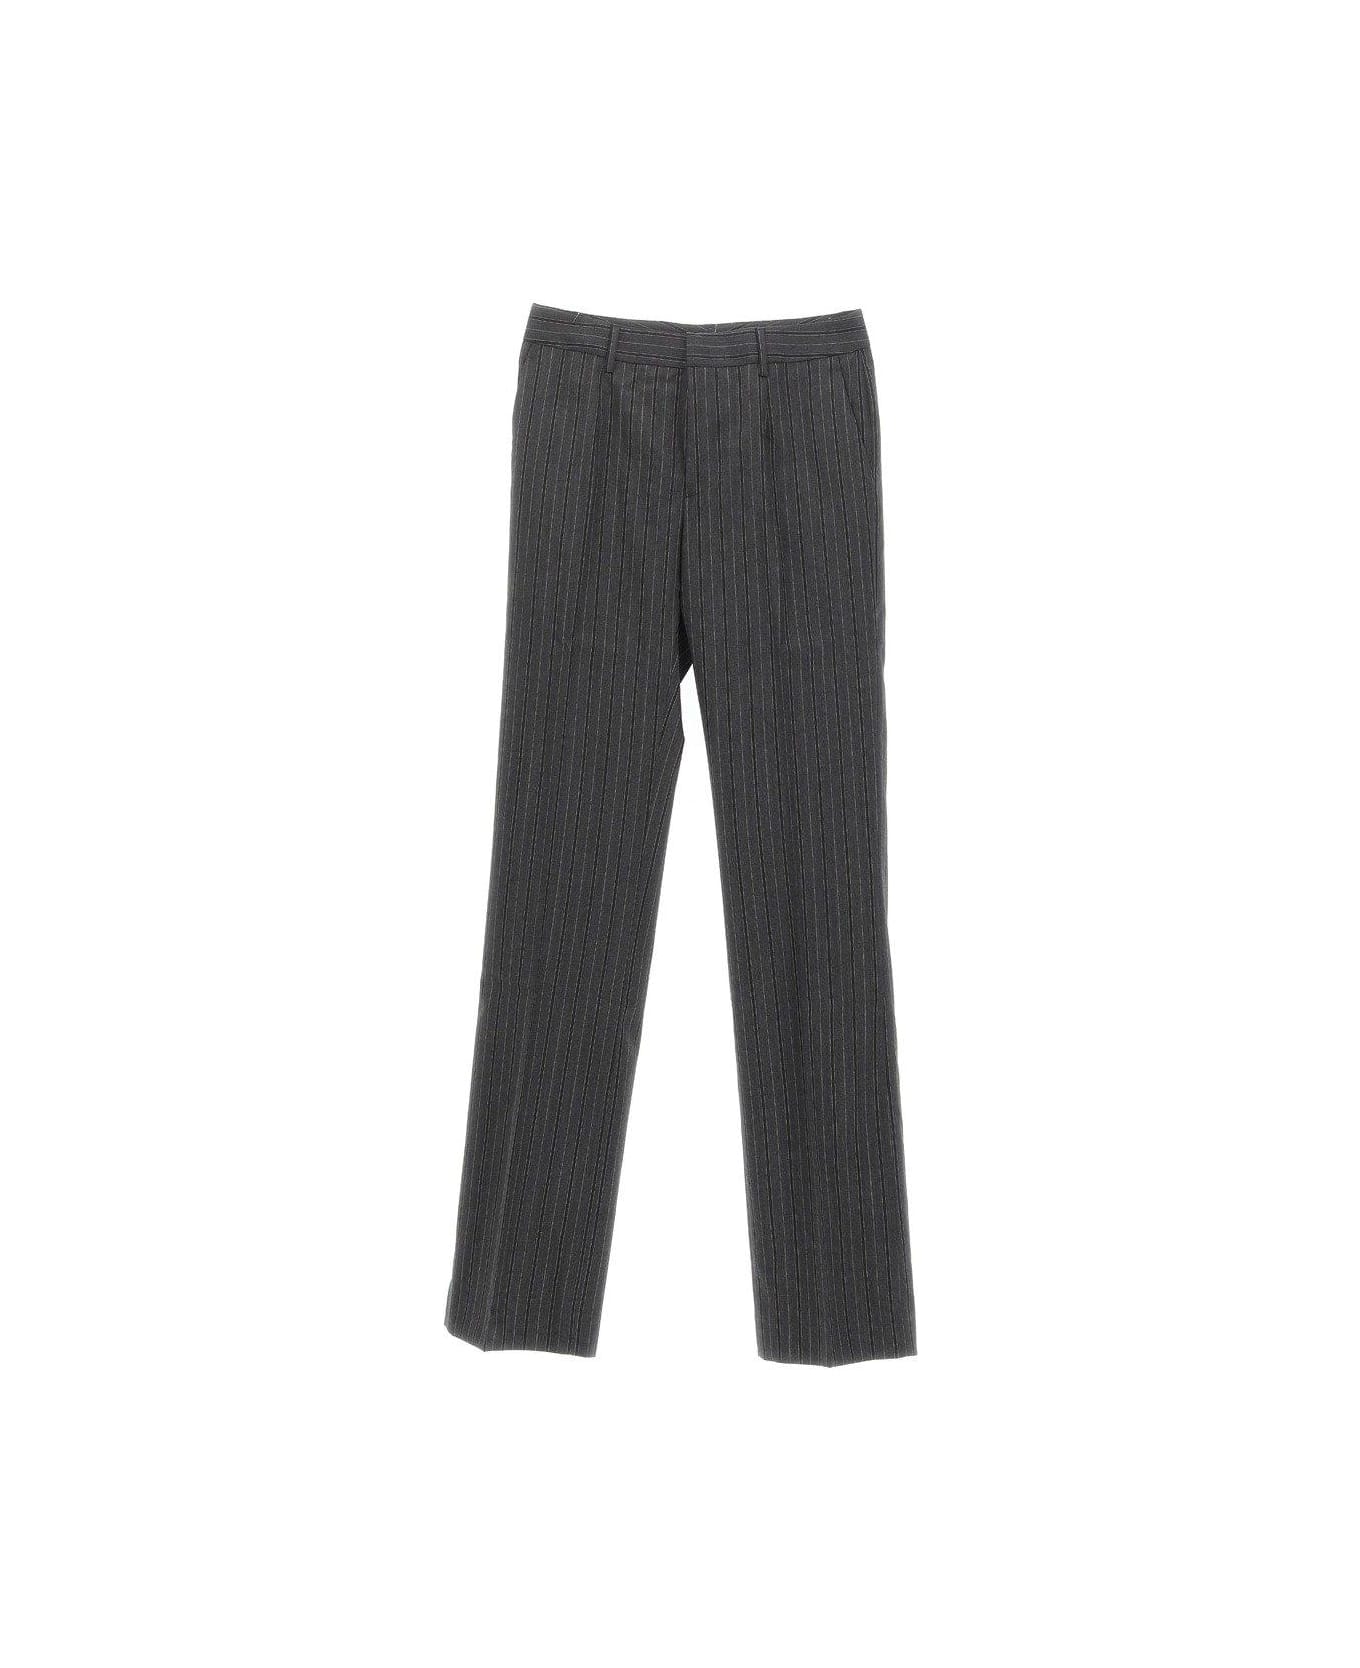 Alessandra Rich Stripe Detailed Tailored Trousers - Grey